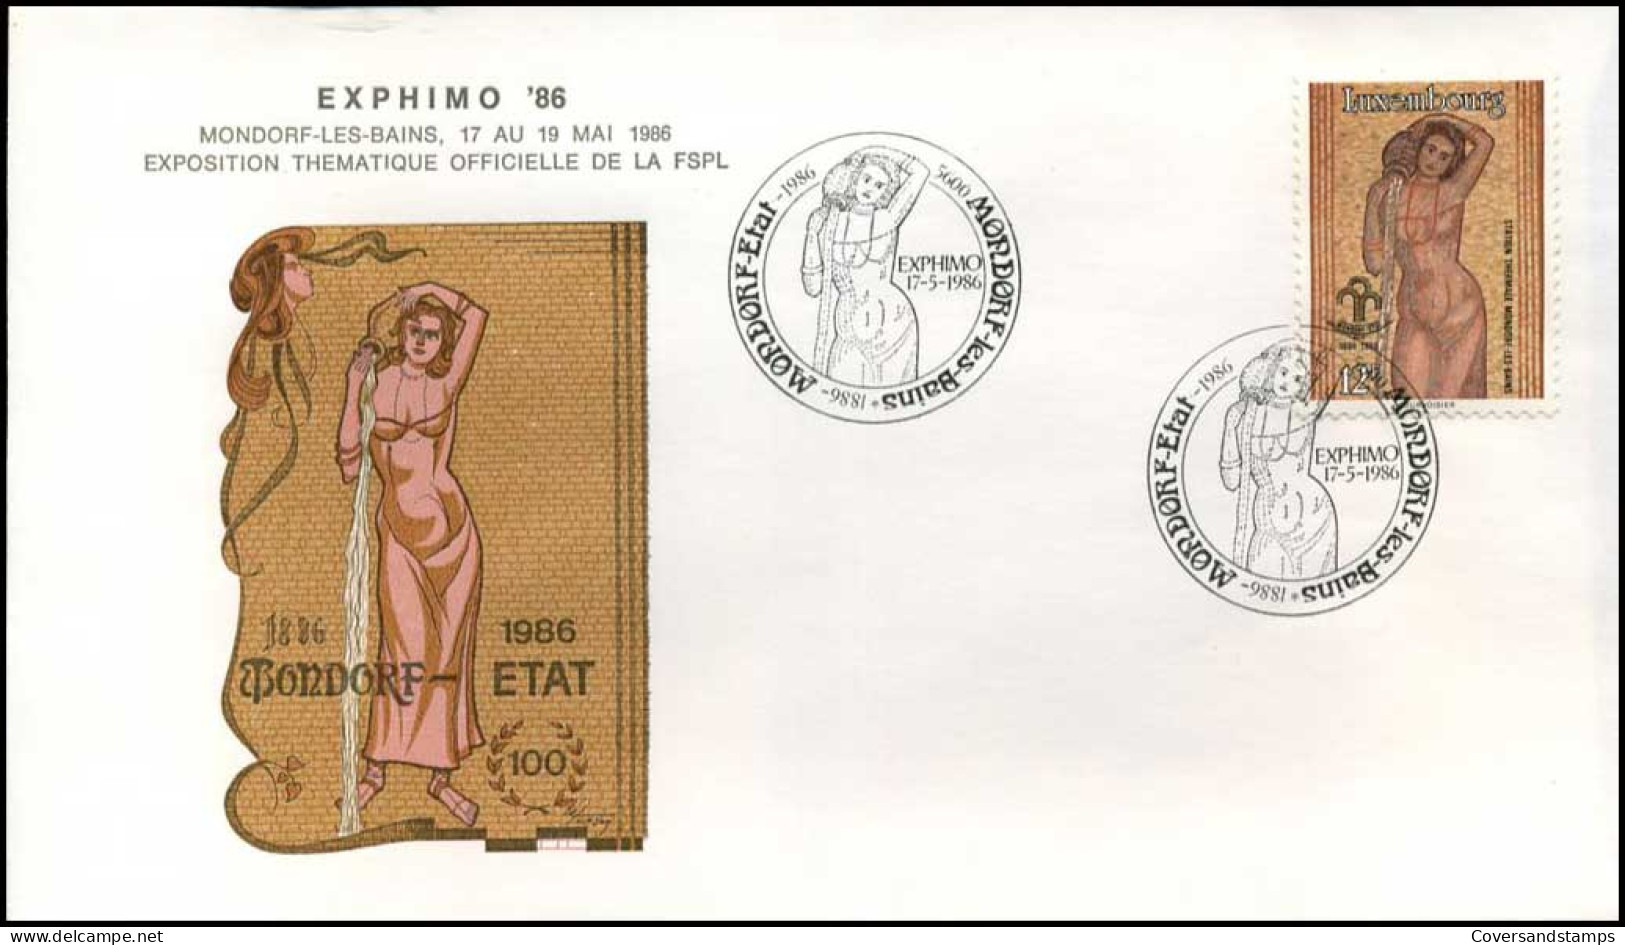 Luxembourg - FDC - Exphimo '86 - FDC